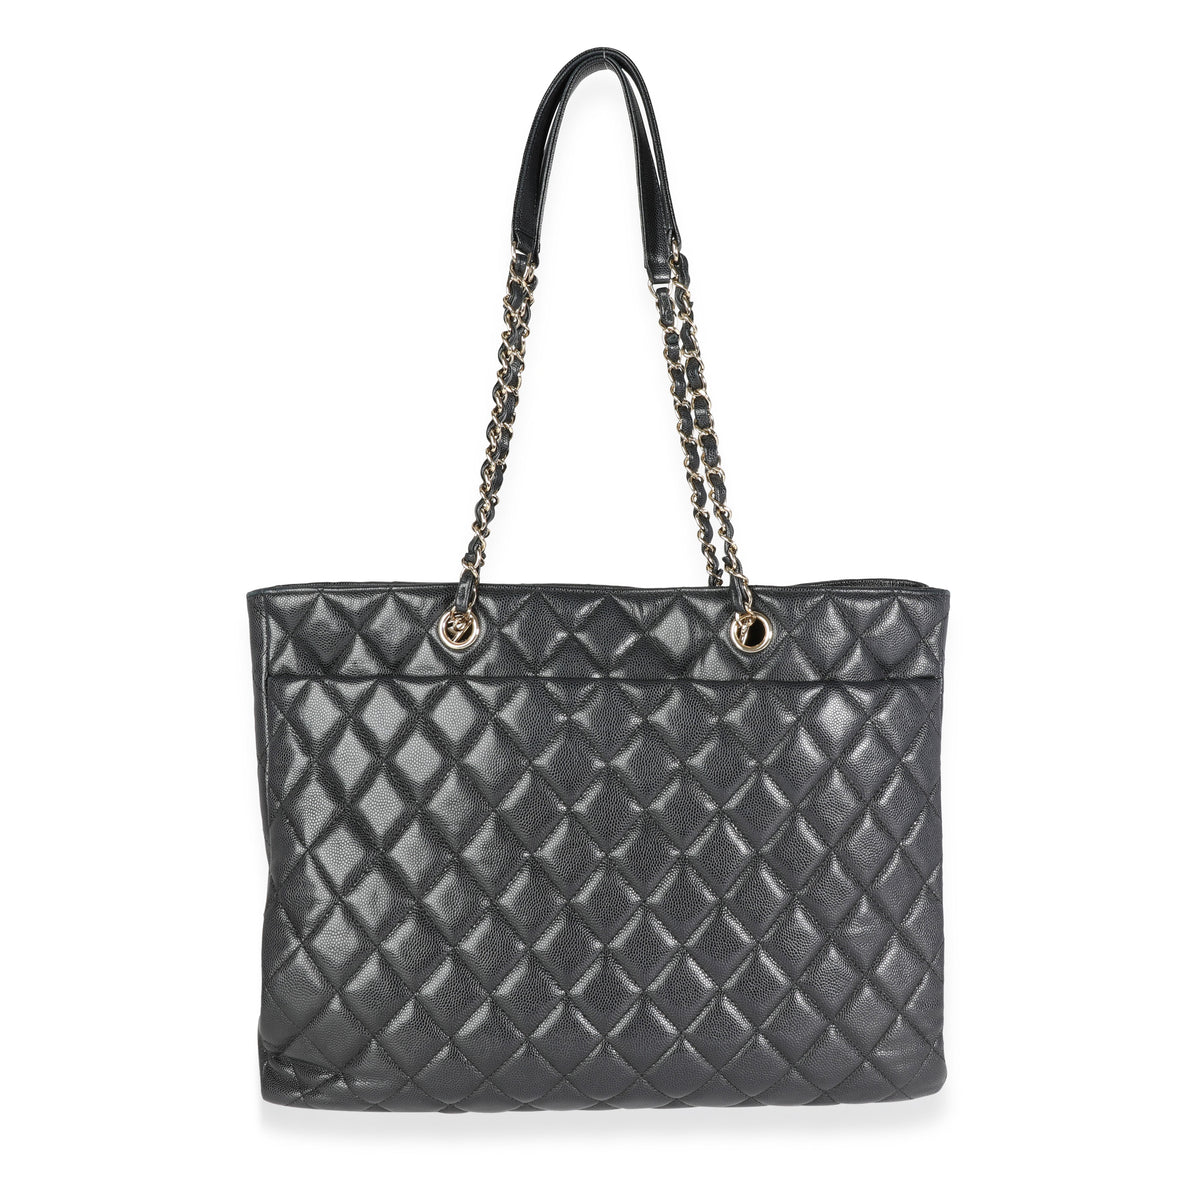 Chanel Black Quilted Caviar Large Shopping Bag